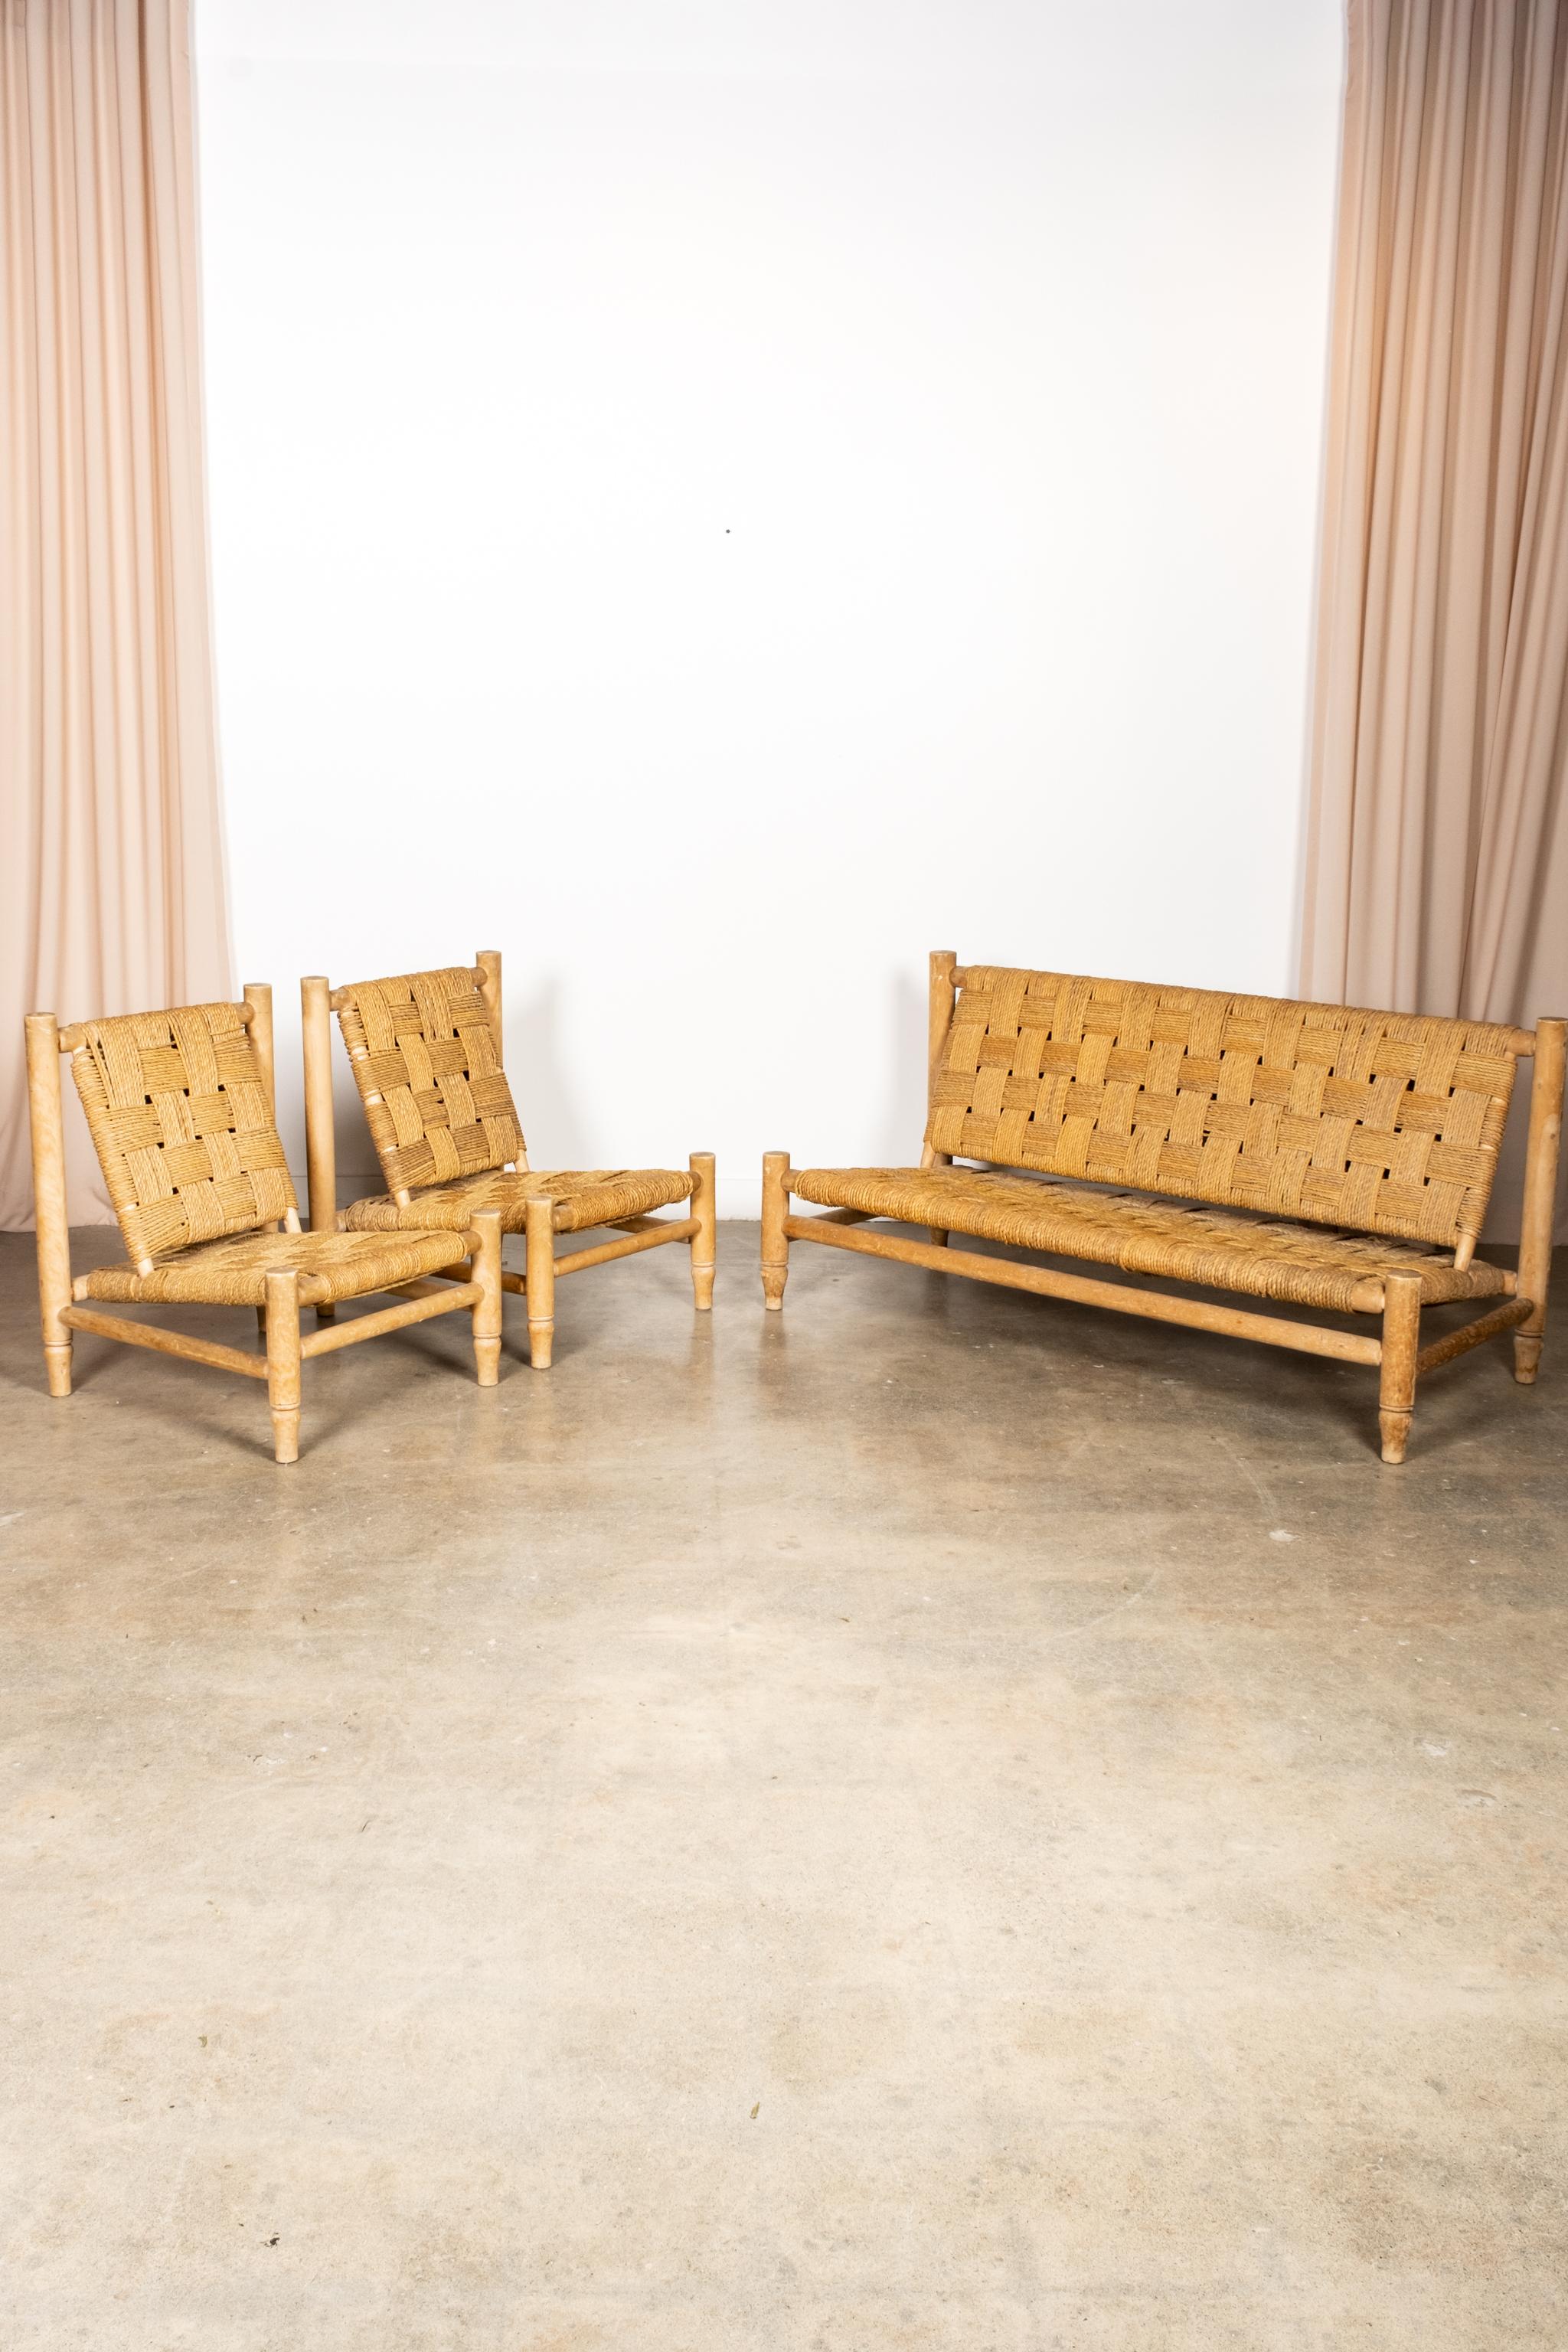 Rare 1950s Wood and Woven Rope 2-Seater Loveseat by Adrien Audoux & Frida Minet 3